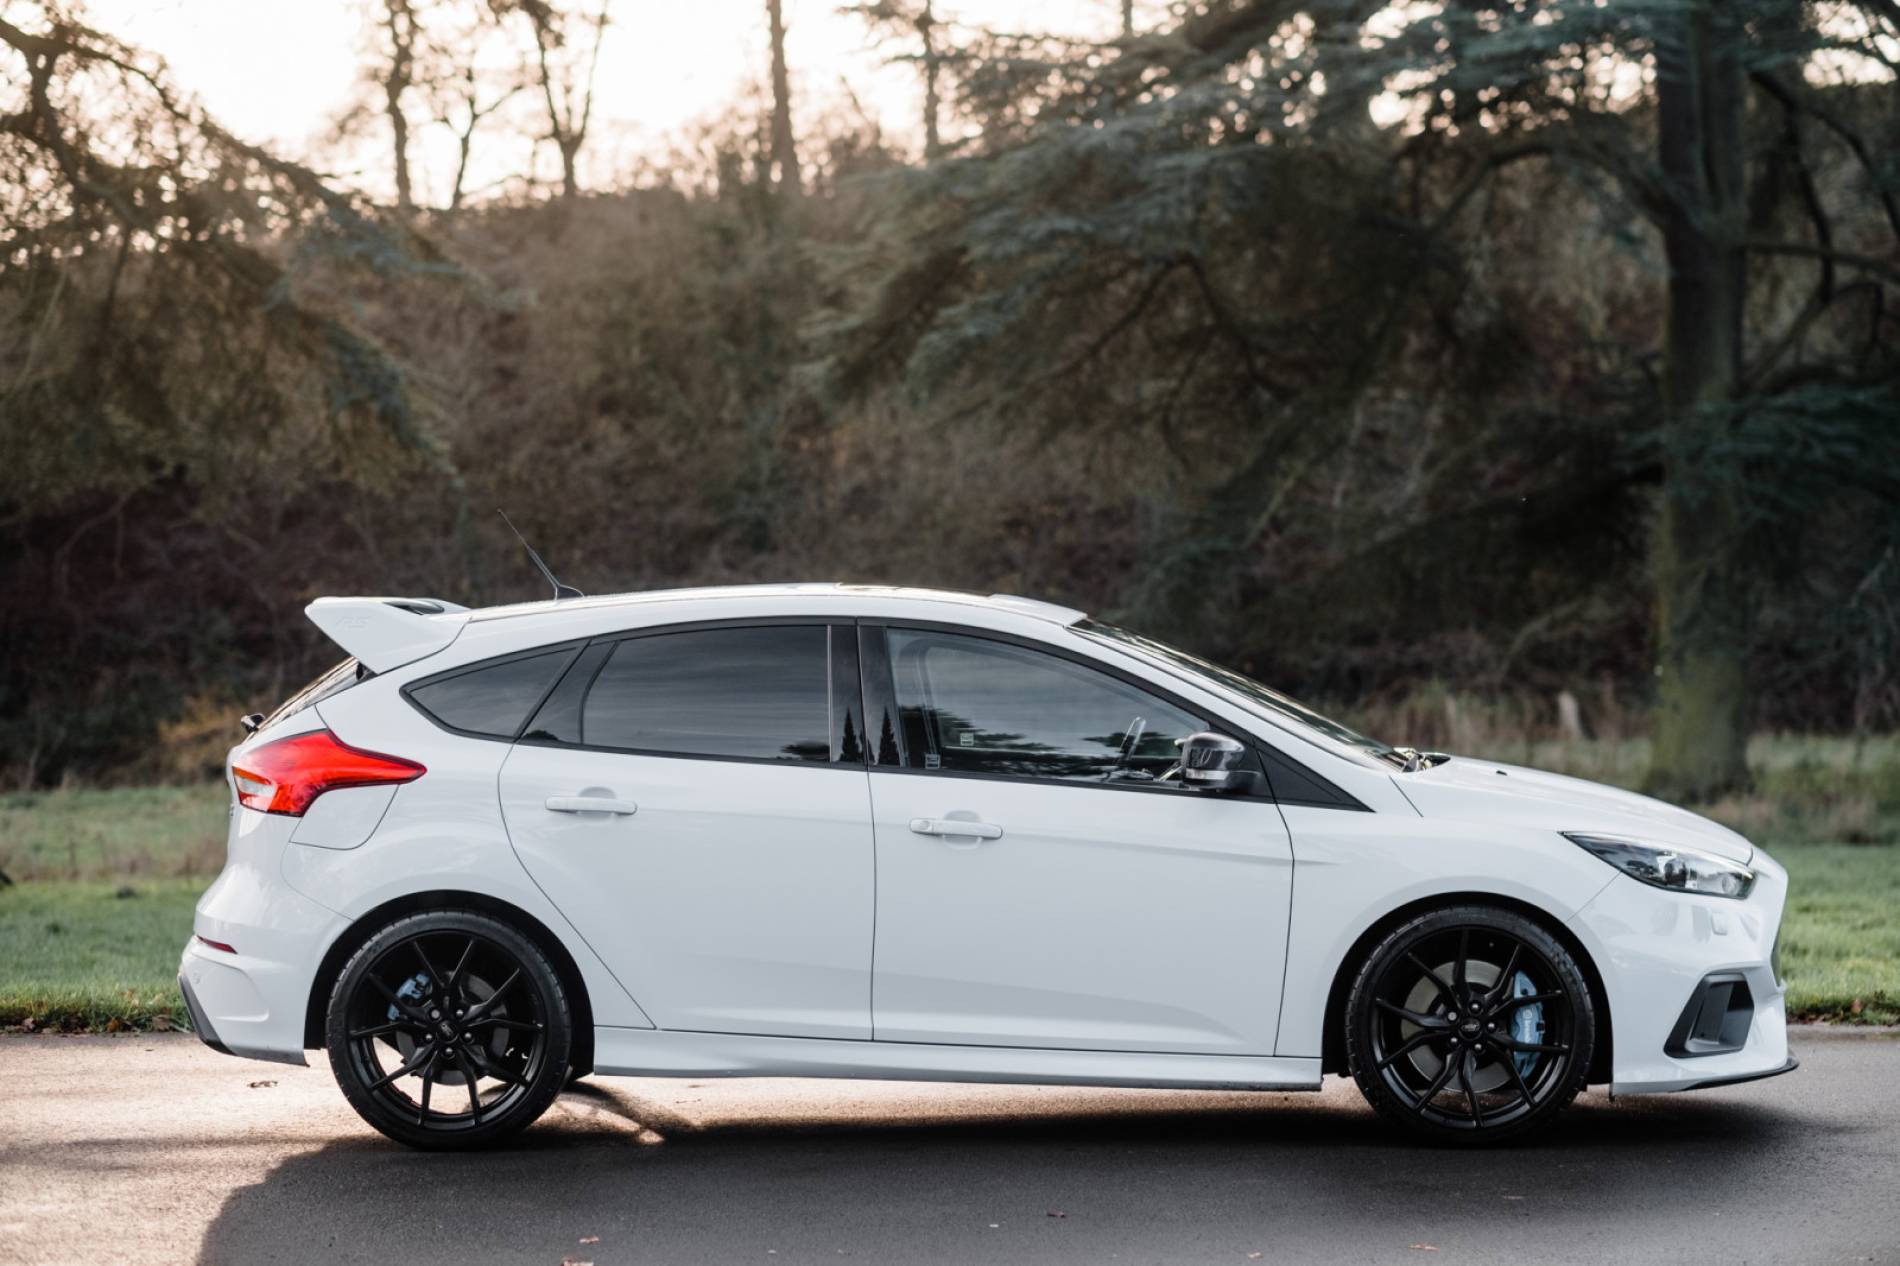 Ford Focus RS FPM375 + £1000